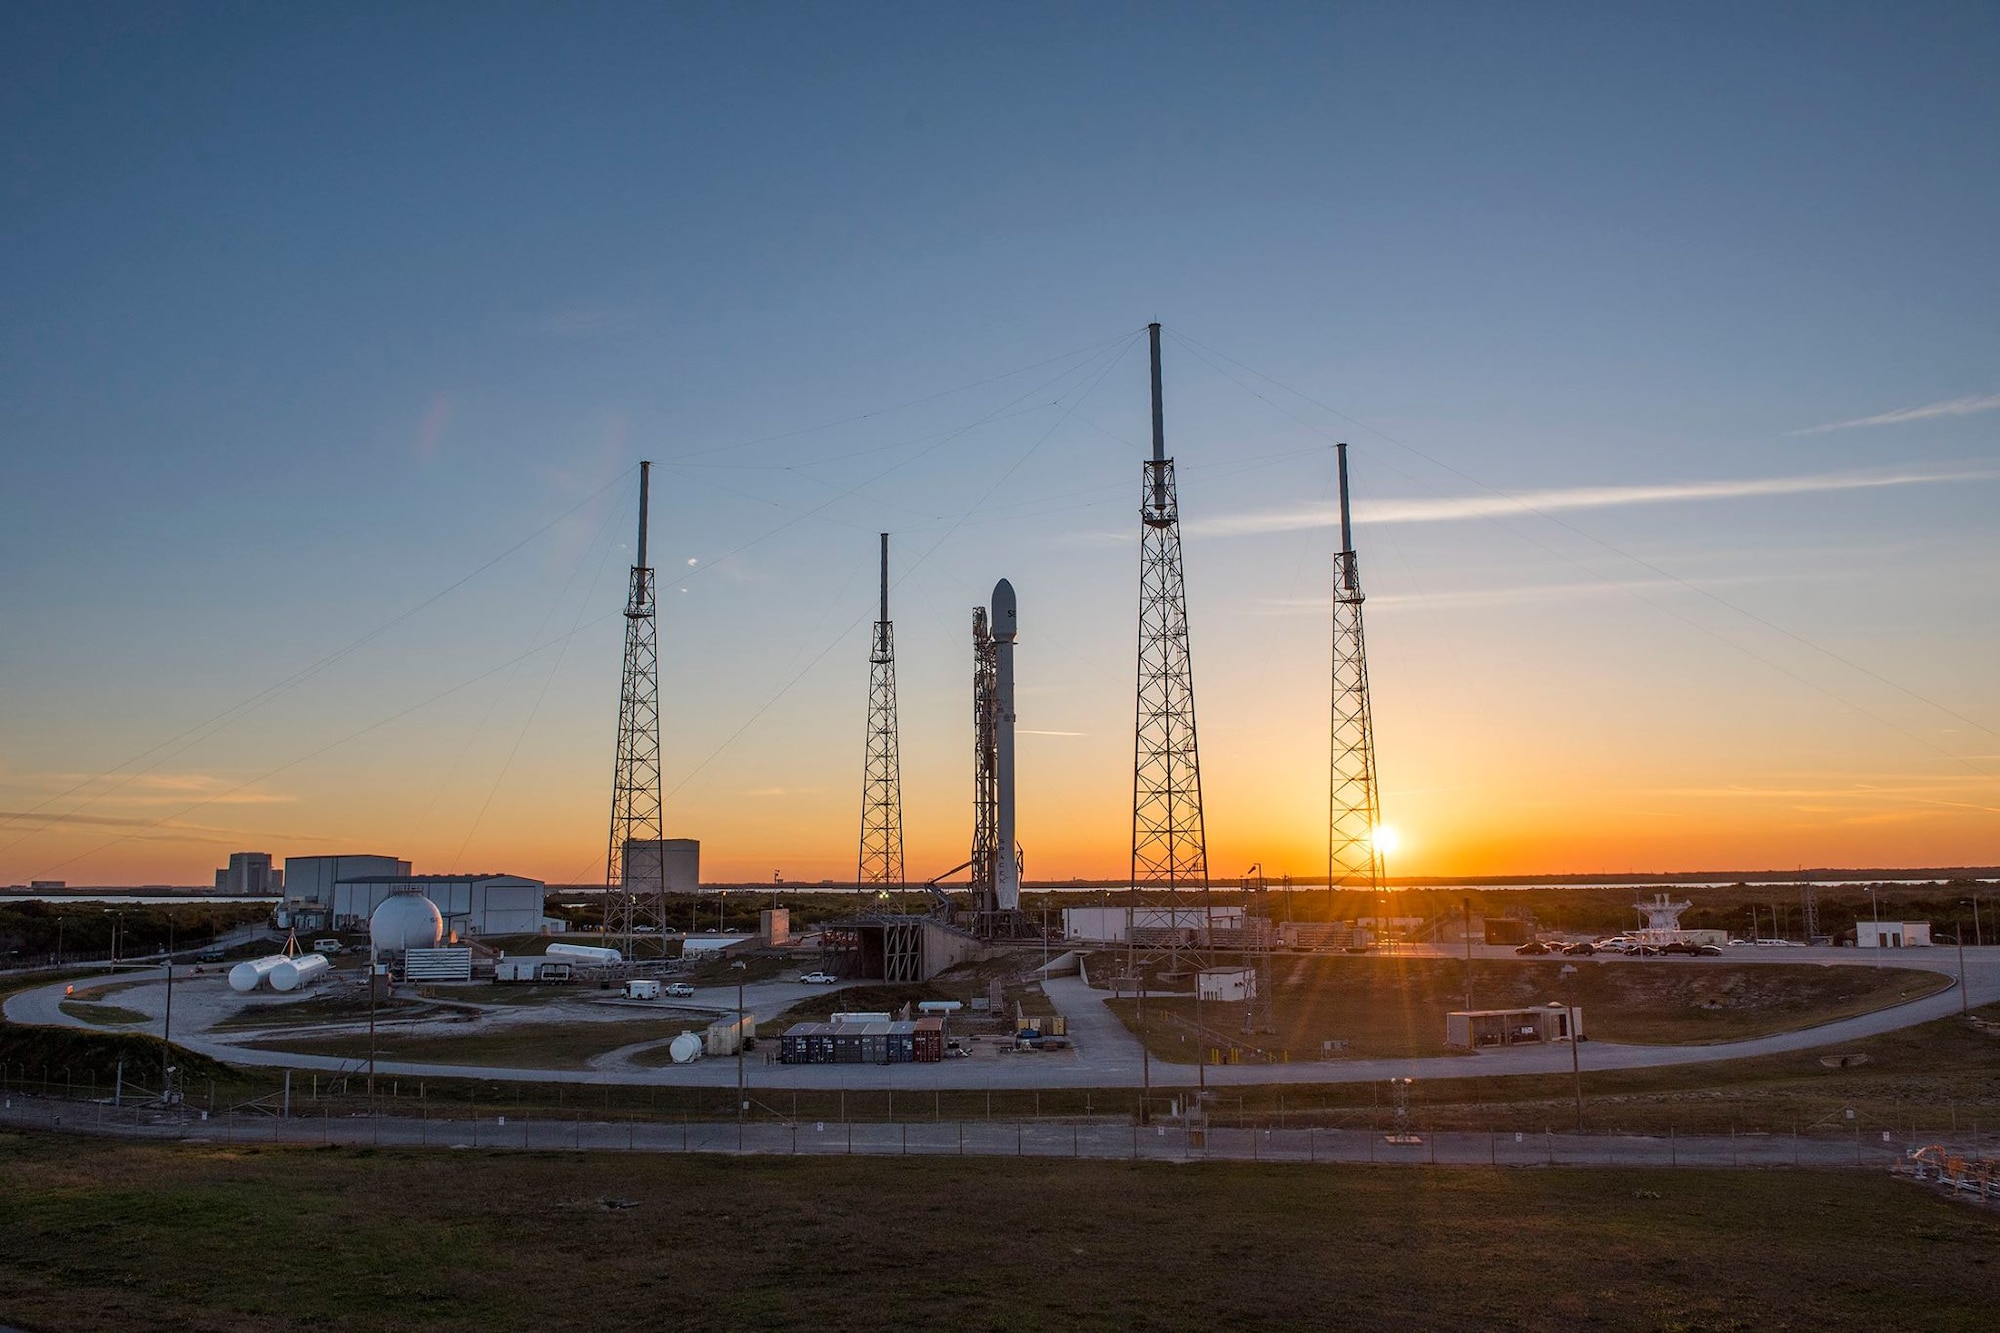 The 45th Space Wing supported the SpaceX Falcon 9 launch of the SES-9 communications satellite March 4, 2016, from Launch Complex 40 on Cape Canaveral Air Force Station, Fla. The satellite increases SES’s global video capabilities in Asia, Indonesia and the Philippines, and is also designed to deliver reliable data connectivity across Asia while providing support to growing mobility communications needs across the Indian Ocean. (Courtesy photo/SpaceX)